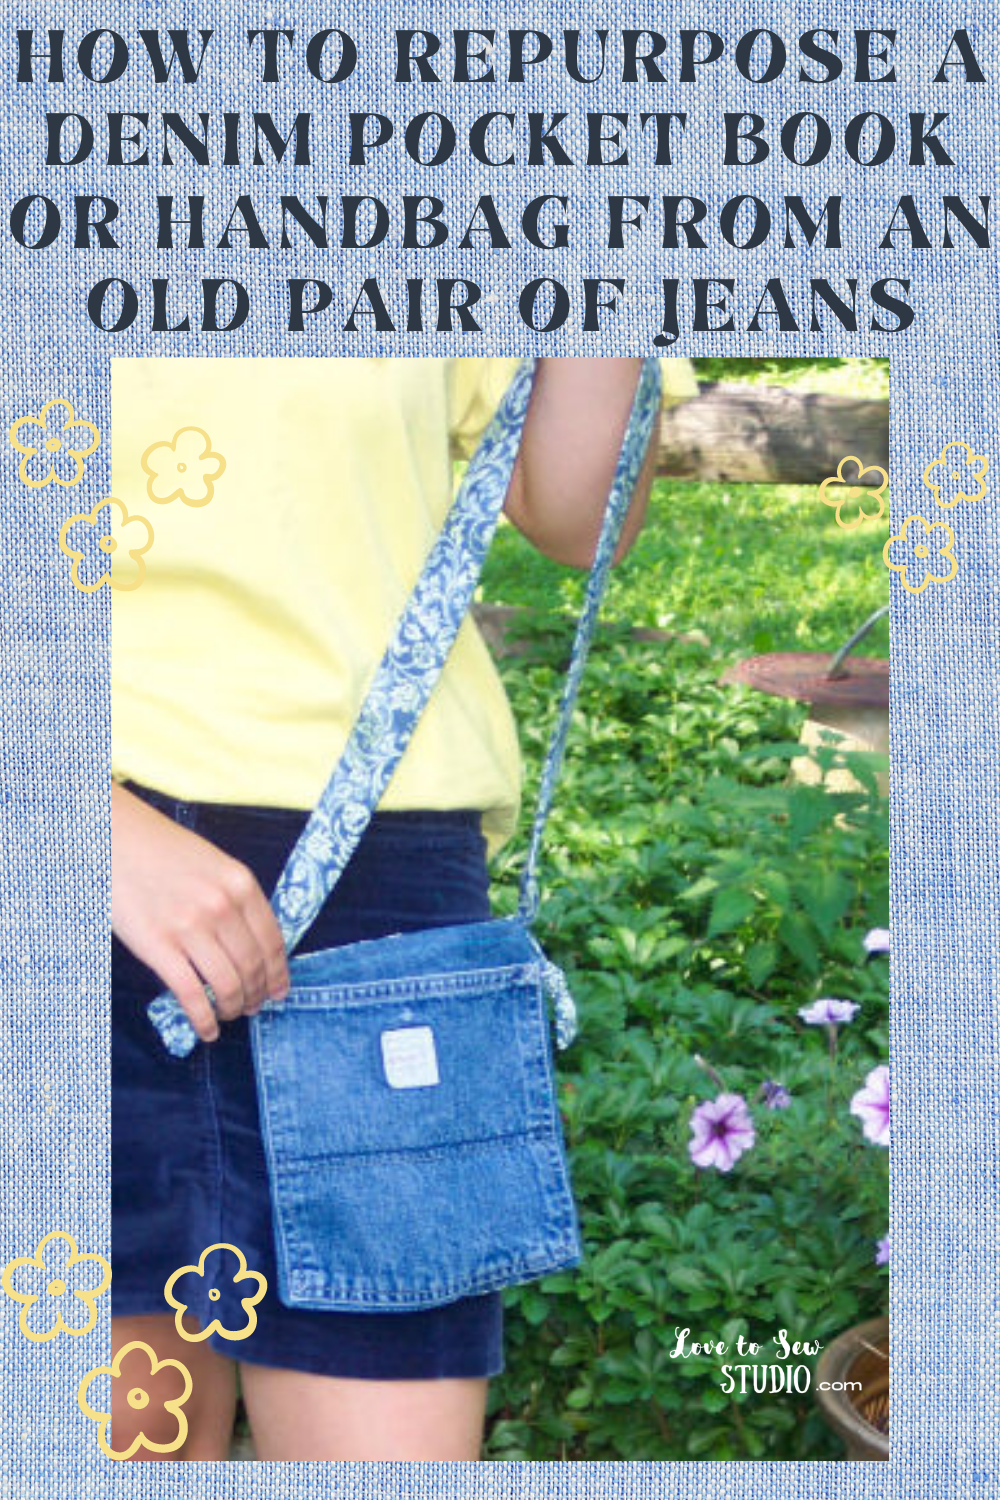 bund forhøjet meteor How to Repurpose a Denim Pocket Book or Handbag from an old pair of jeans -  Love to Sew Studio